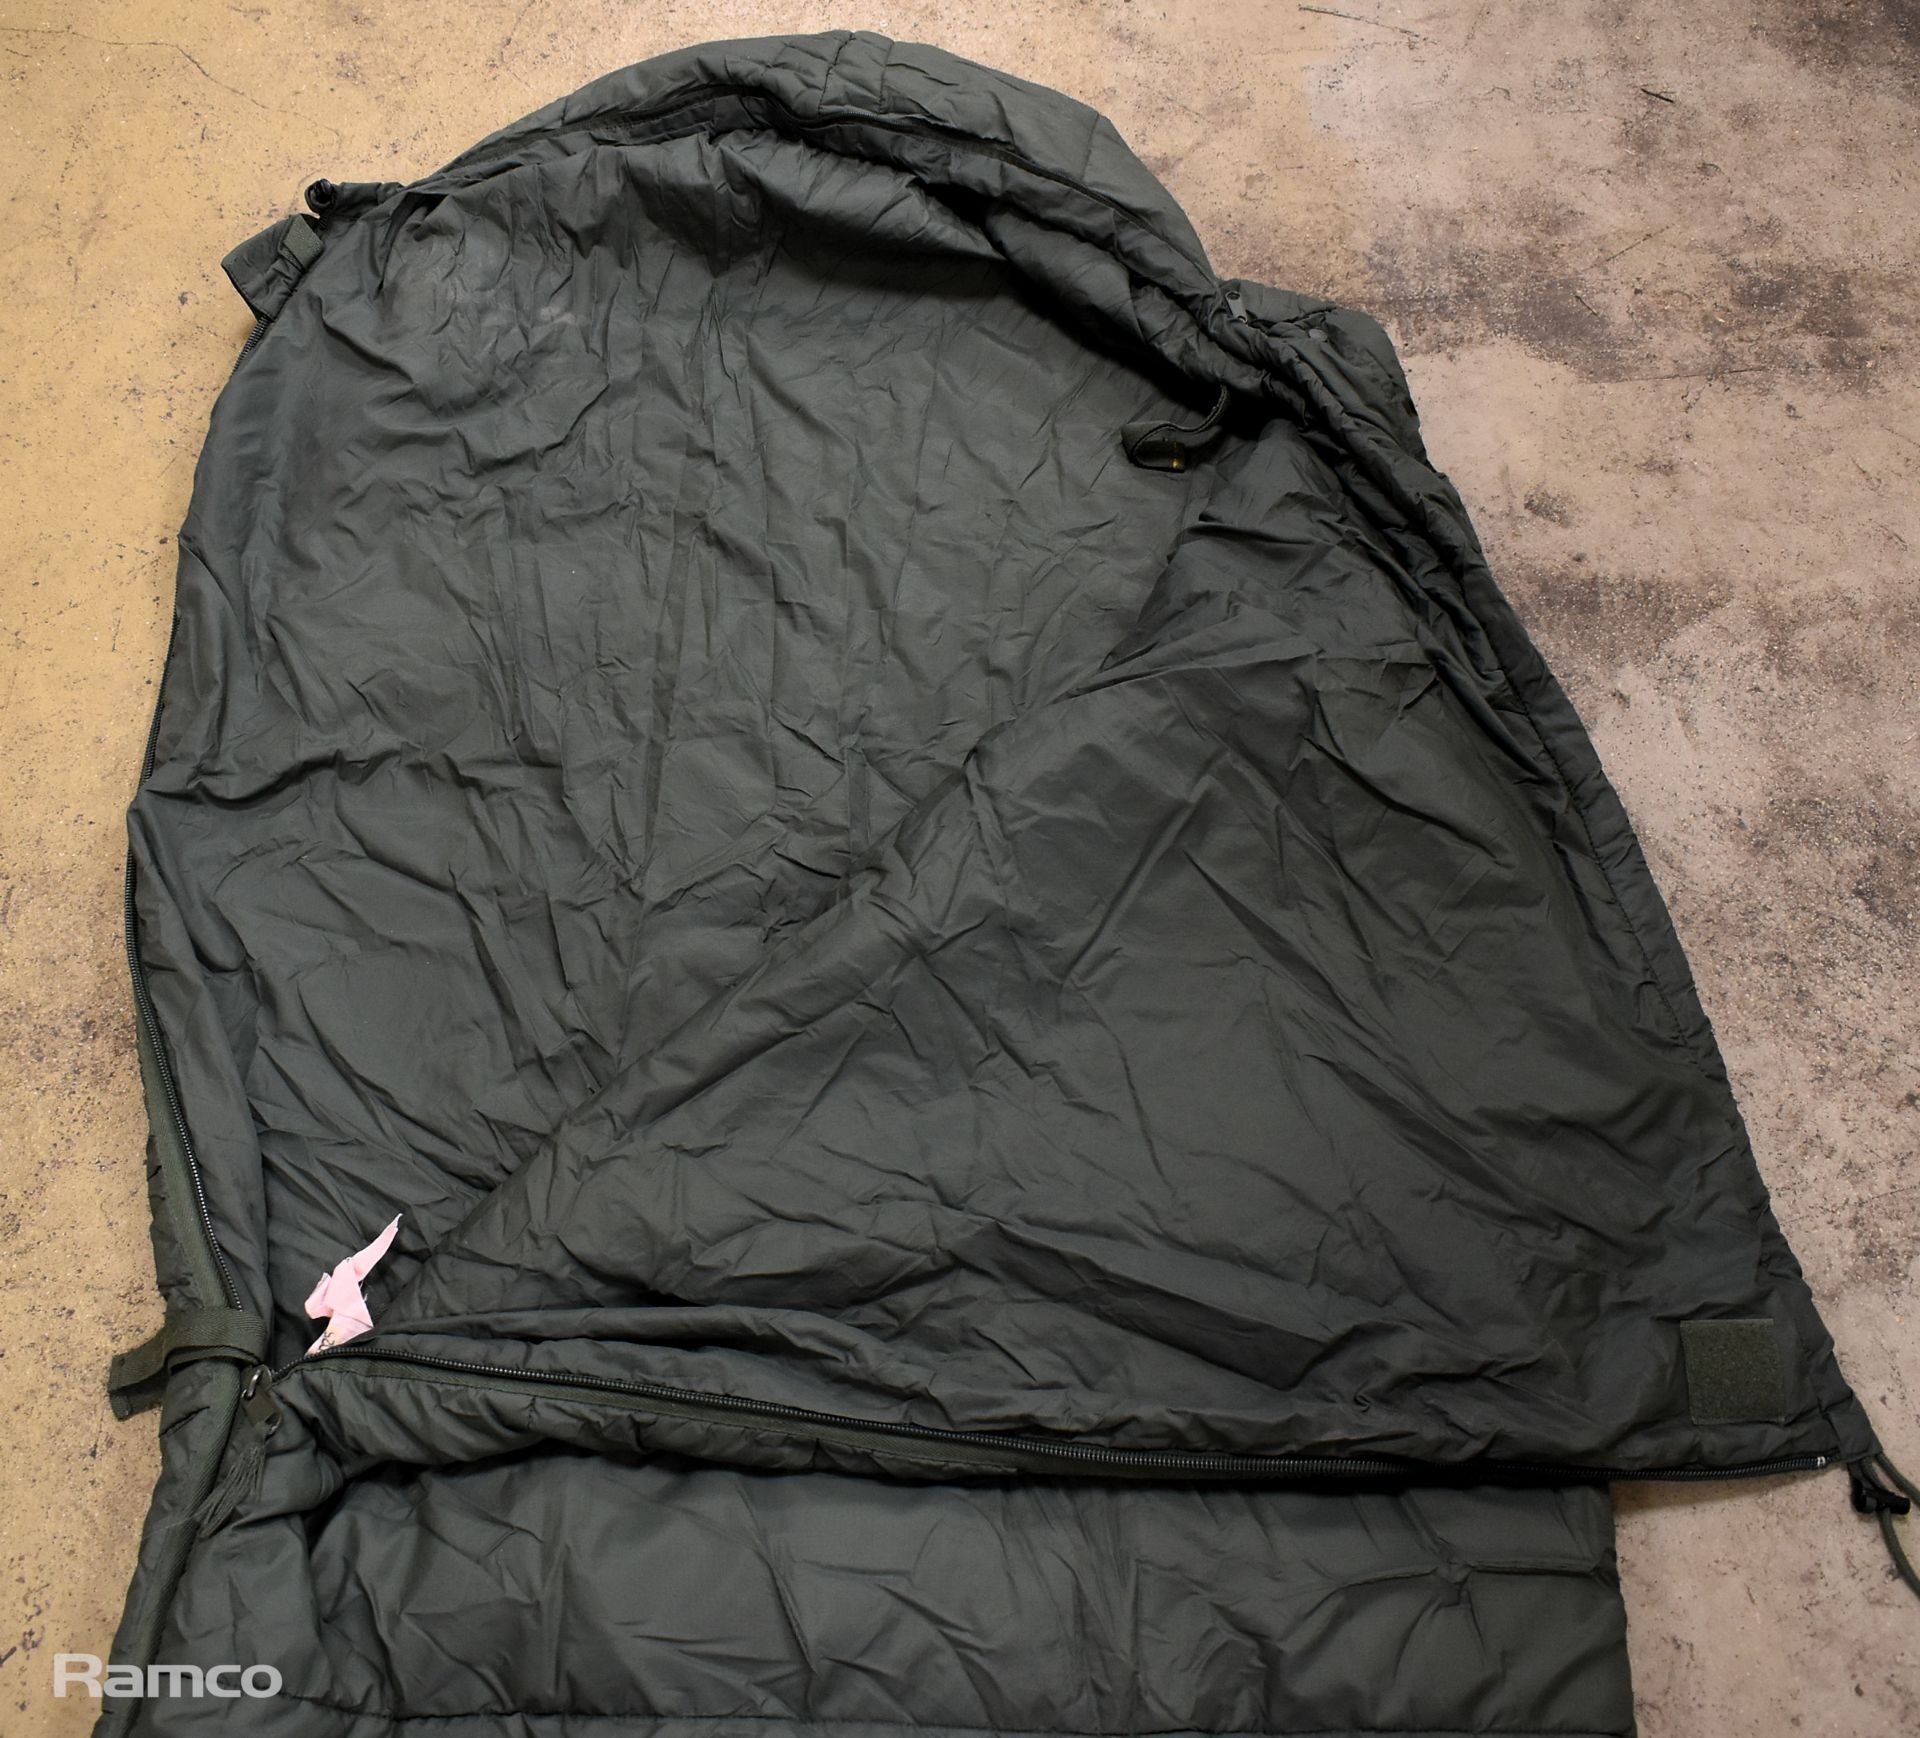 30x Sleeping bags - mixed grades and sizes - Image 2 of 8